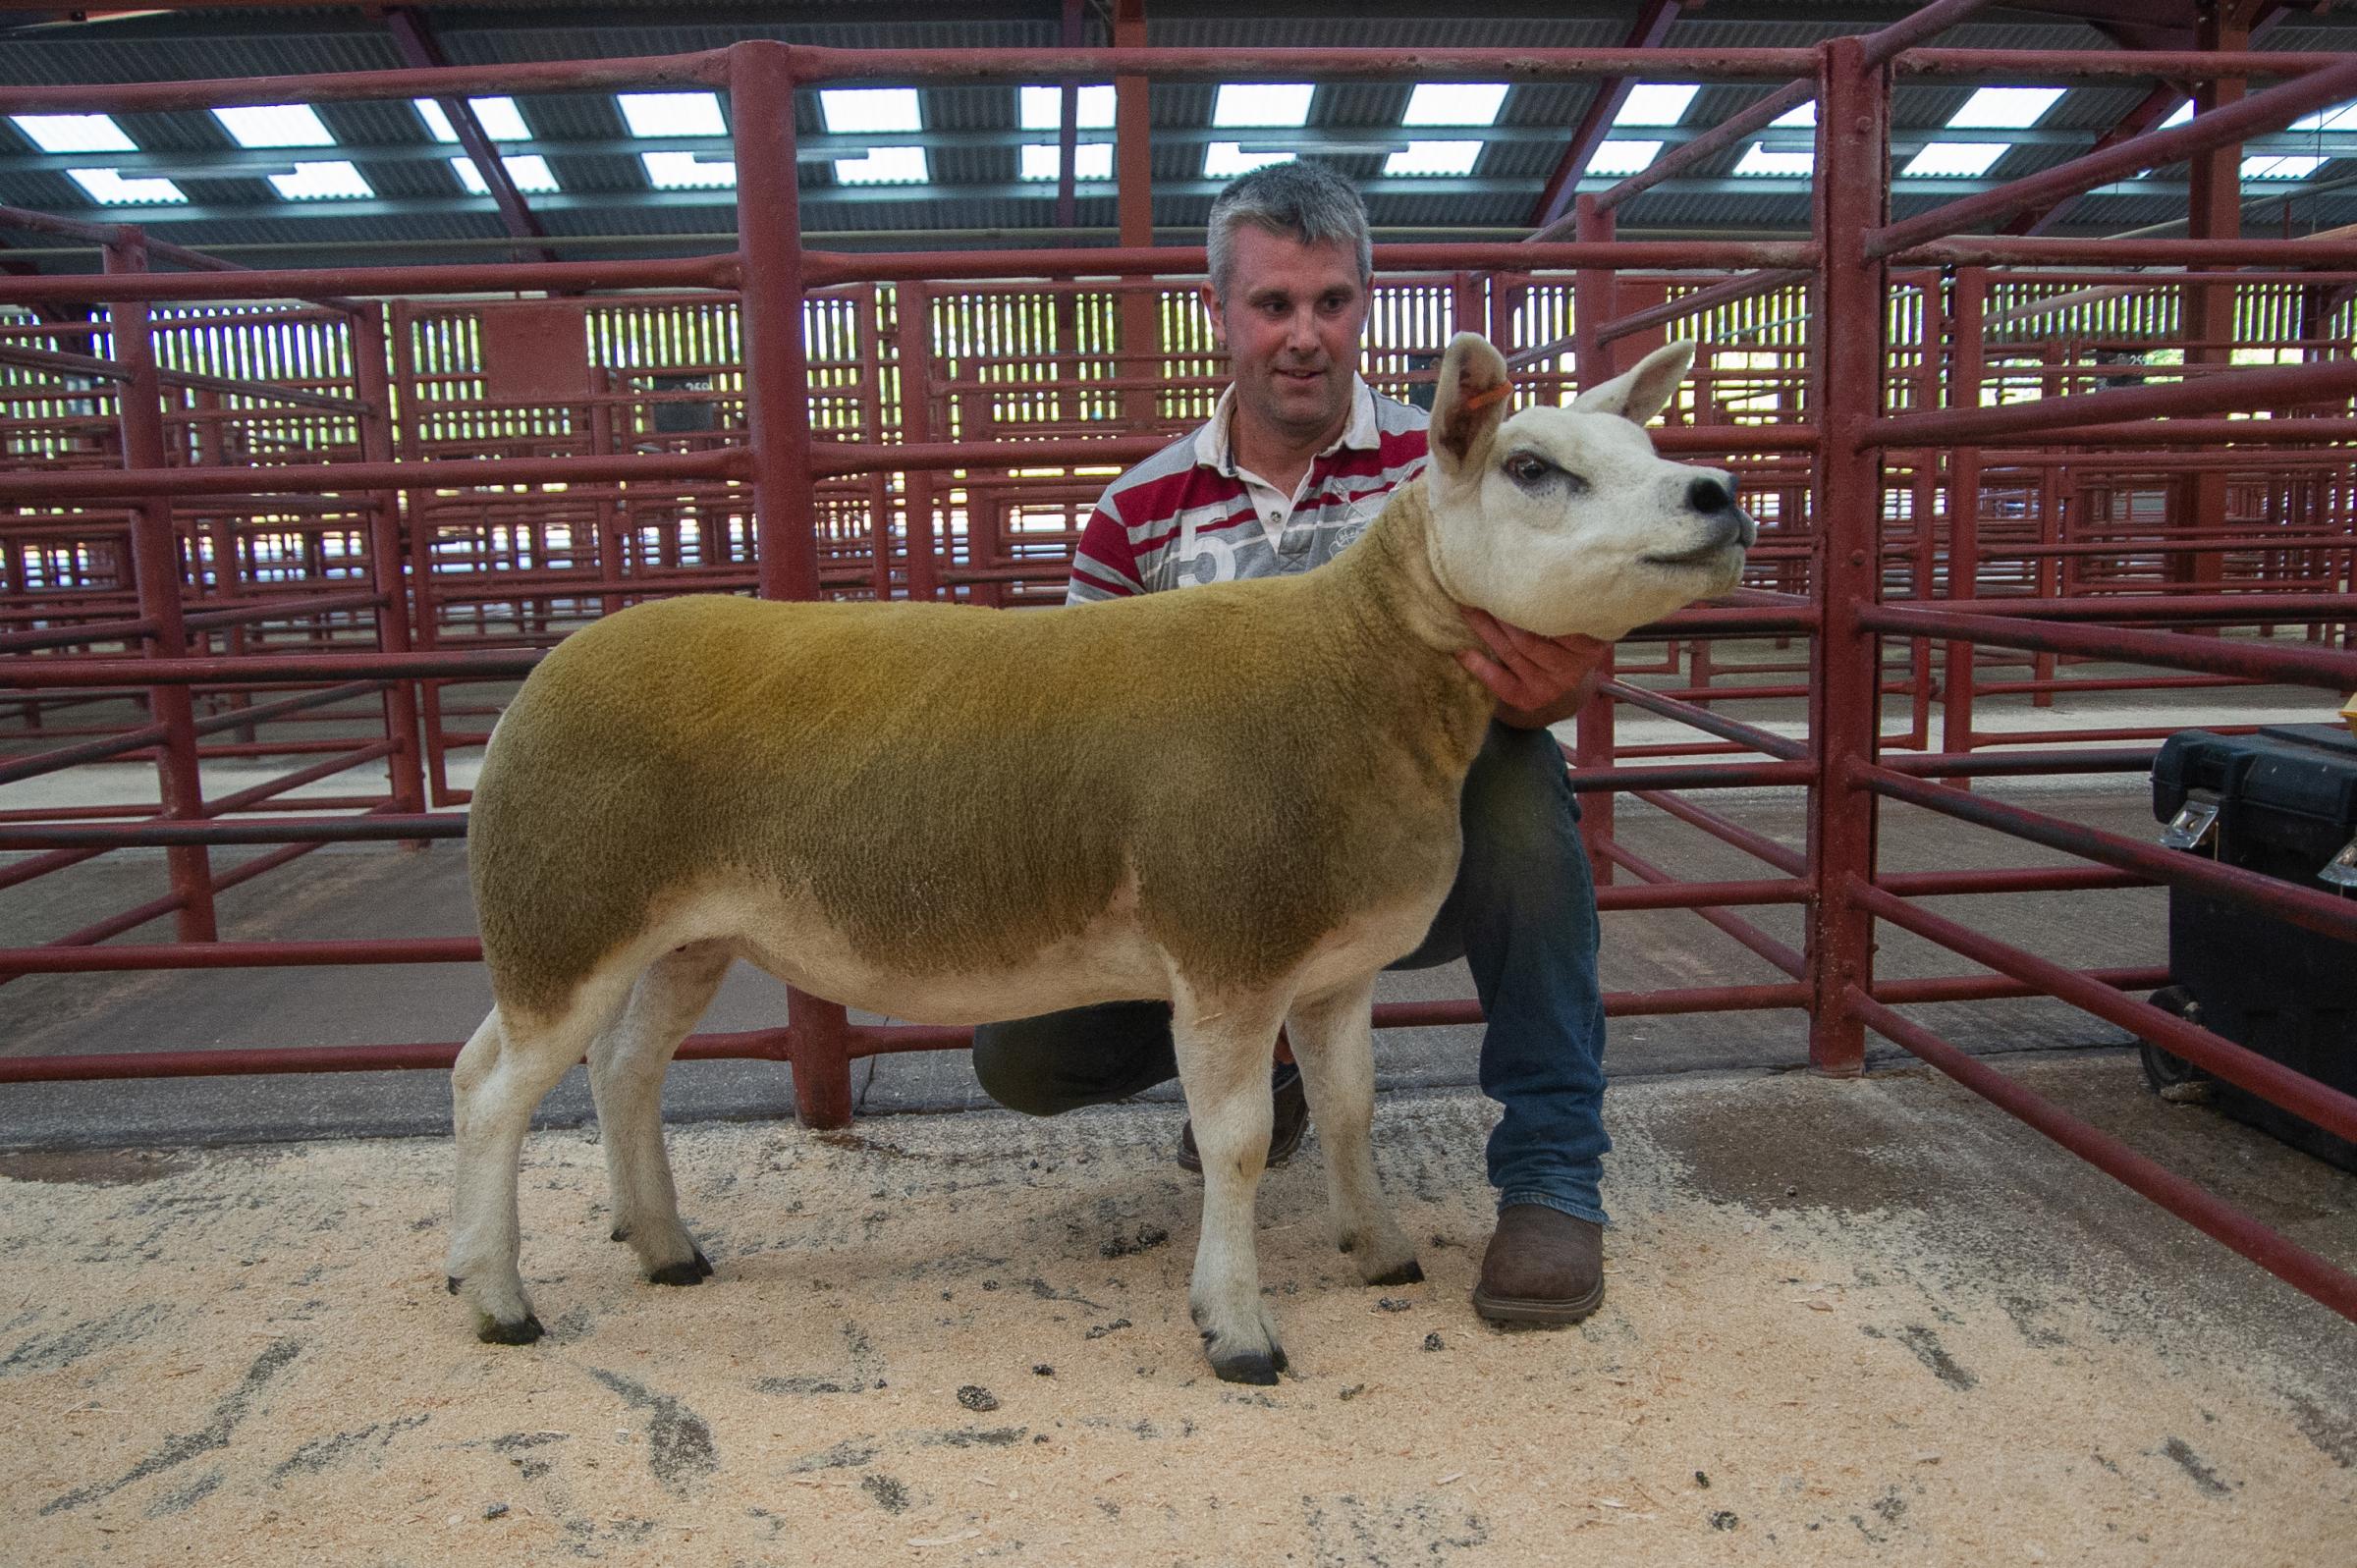 This Texel gimmer from Hazel Laughton made 3000 gns